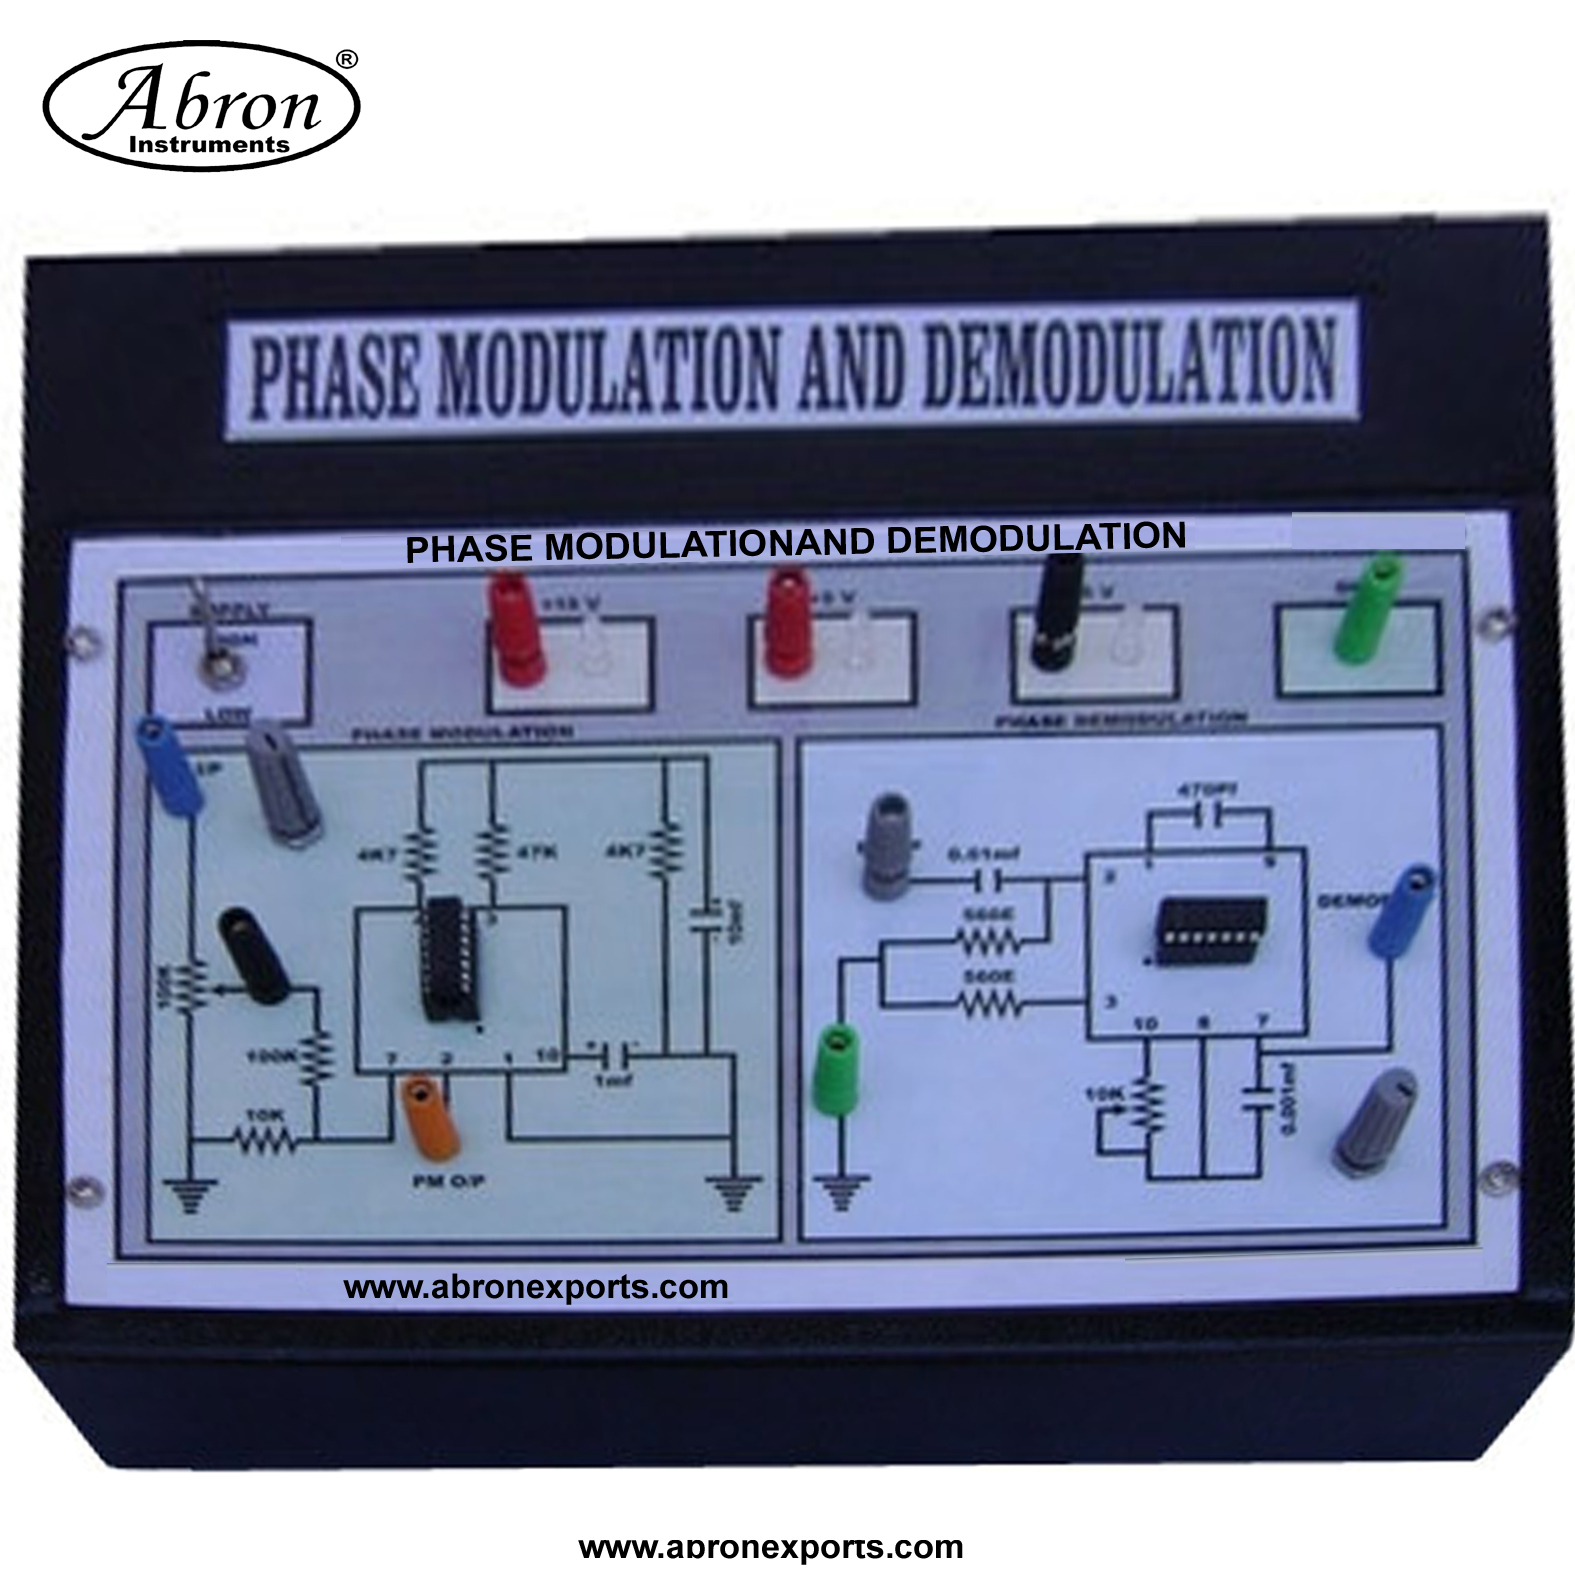 Phase Modulation And Demodulation circuit trainer kit with sockets and power supply connecting wires AE-1309PH